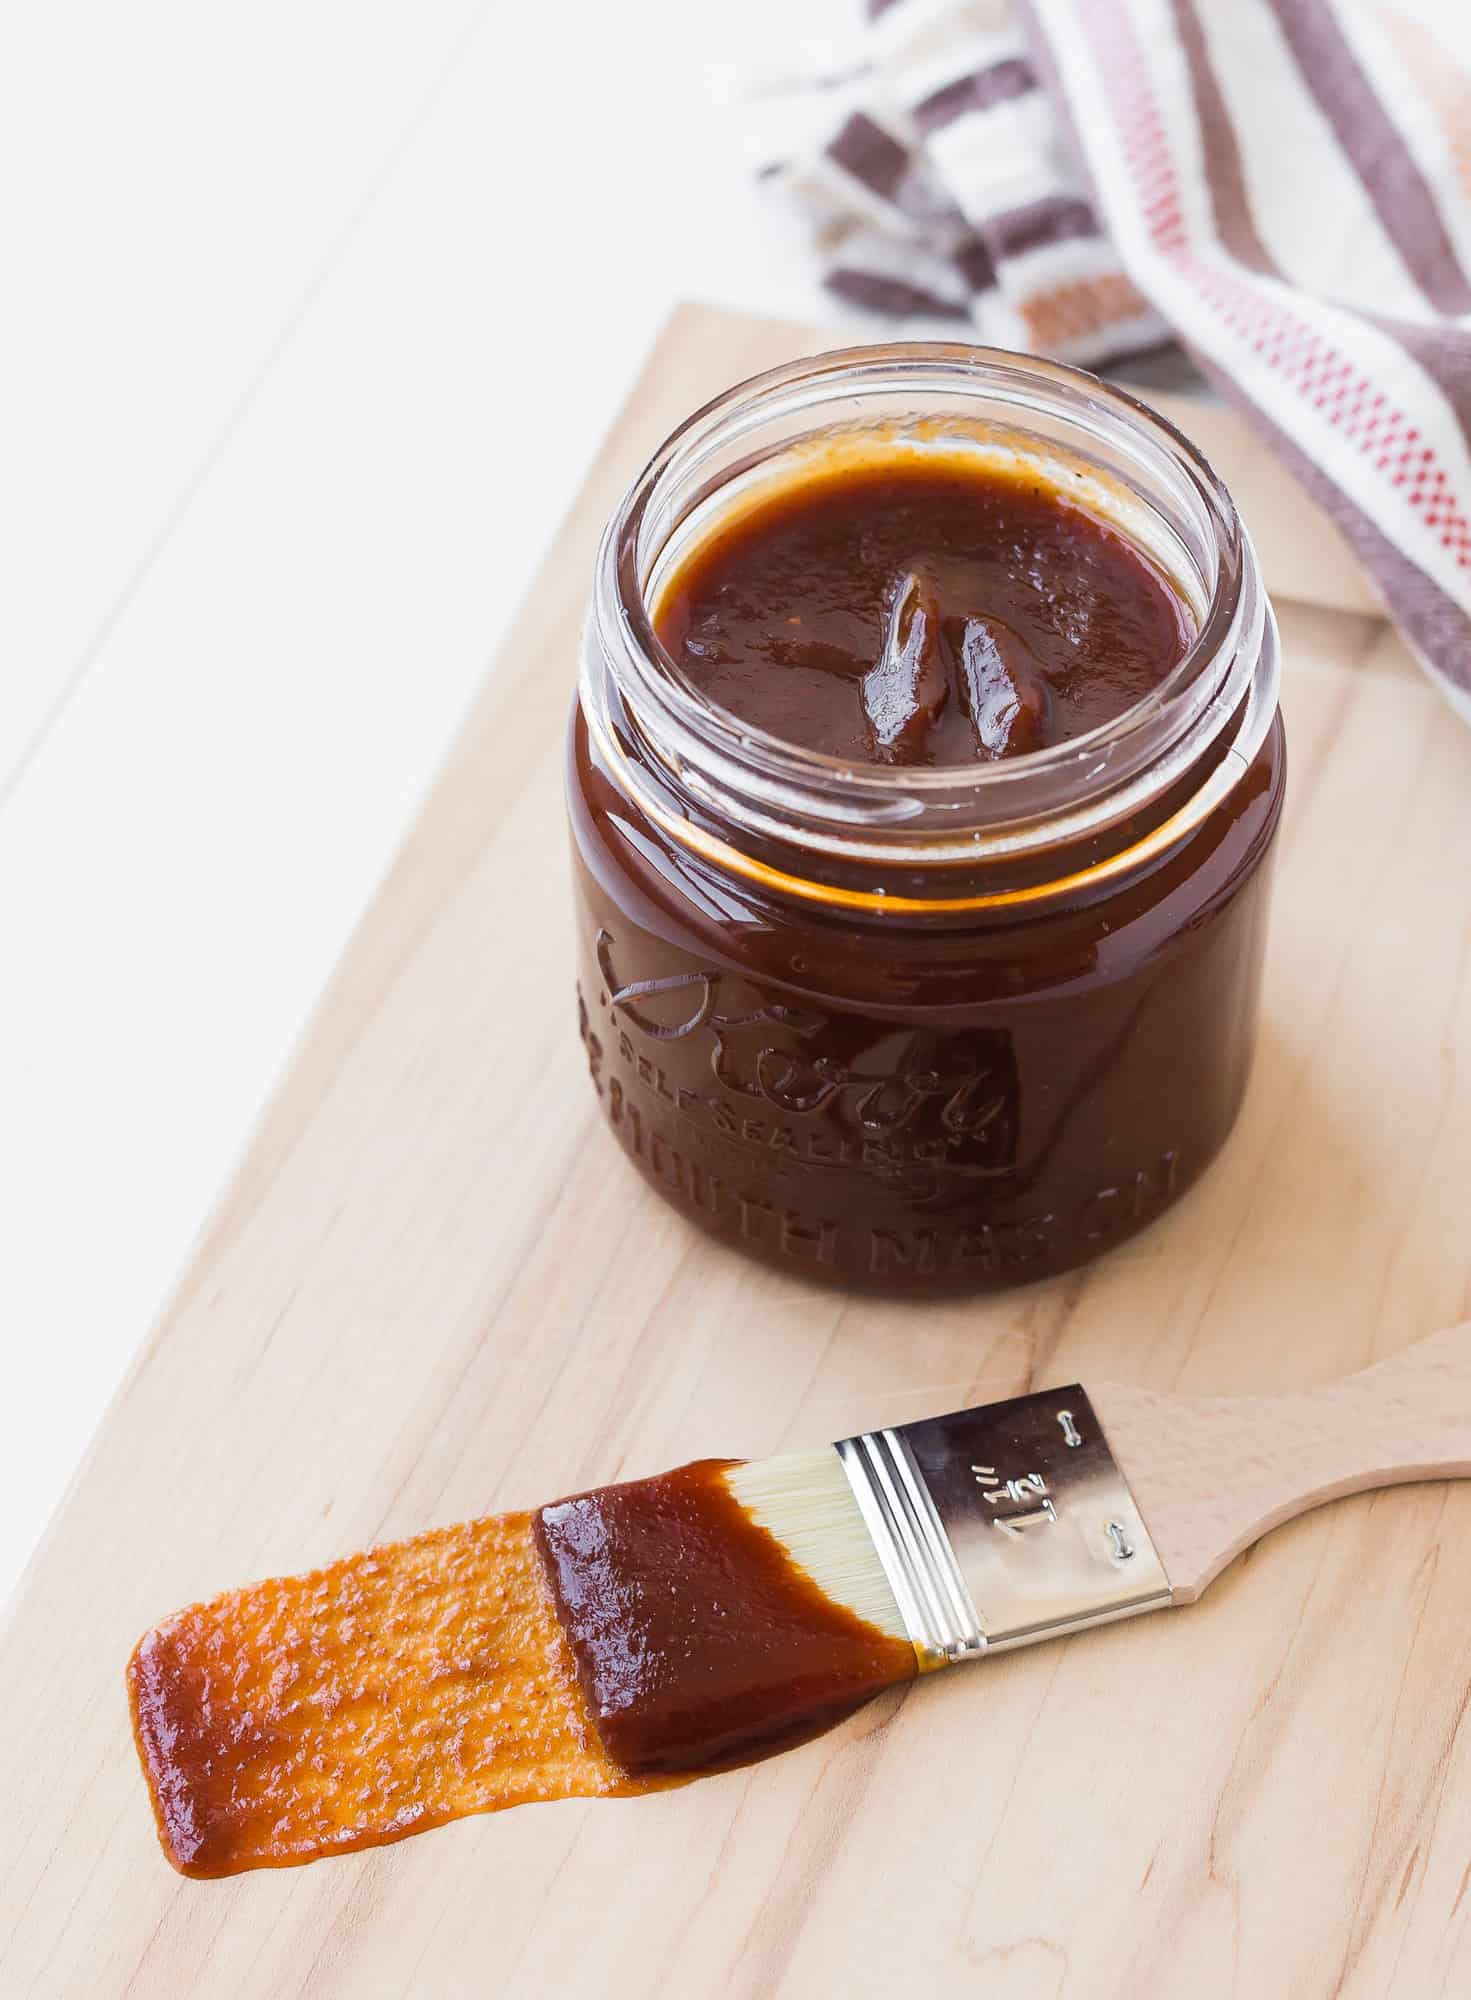 Barbecue sauce in a small glass jar and on a wooden handled brush.